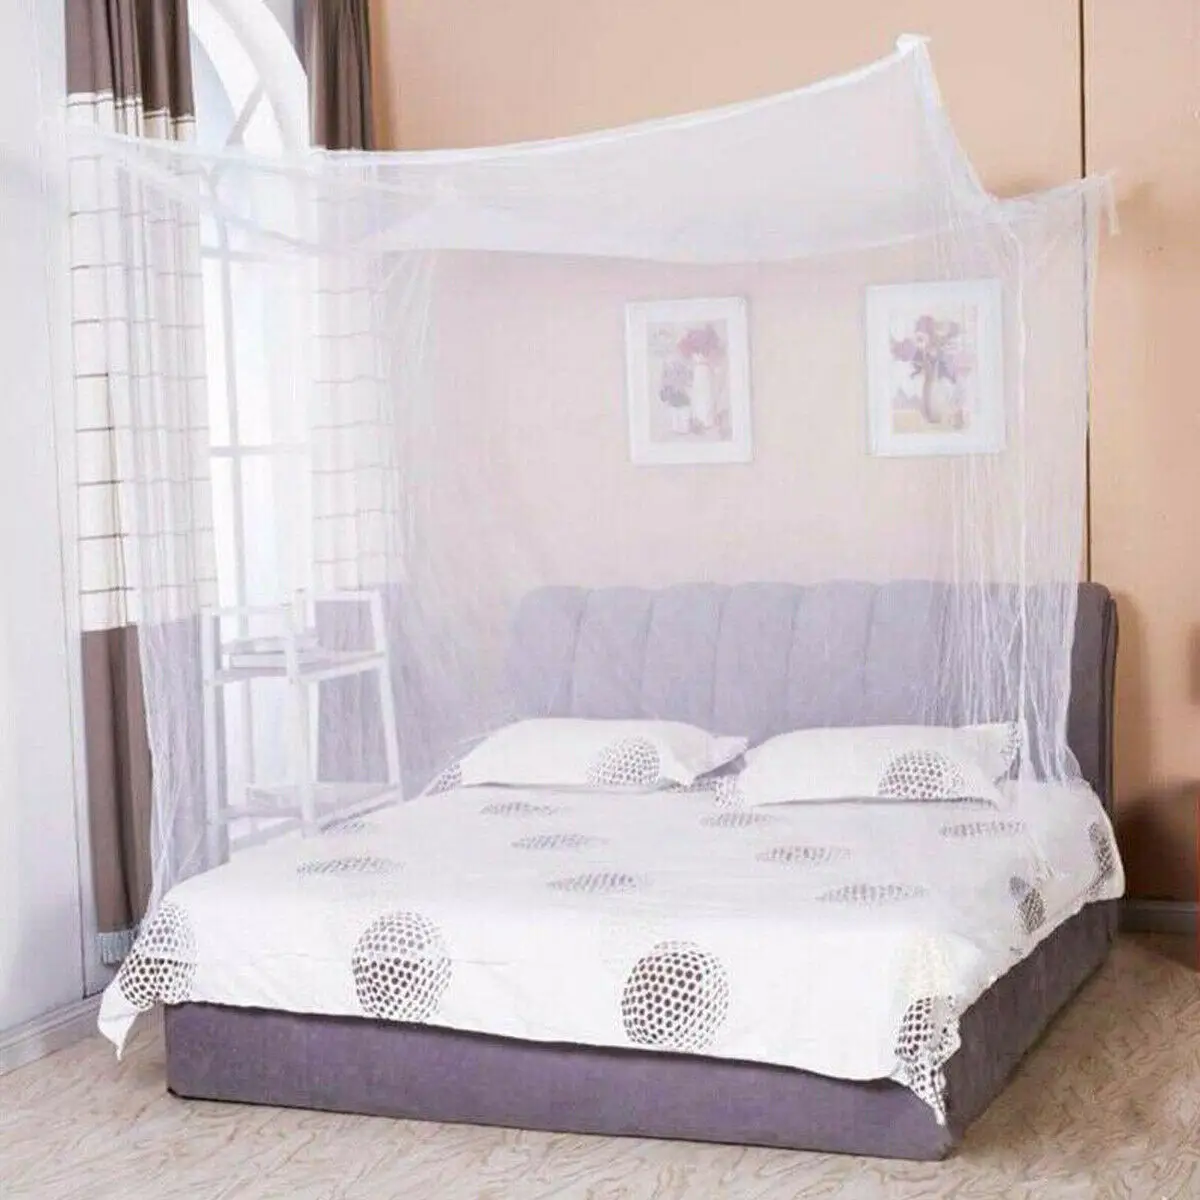 

Limit 100 NEW Lace Bed Mosquito Insect Netting Mesh Canopy Princess Full Size Bedding Net